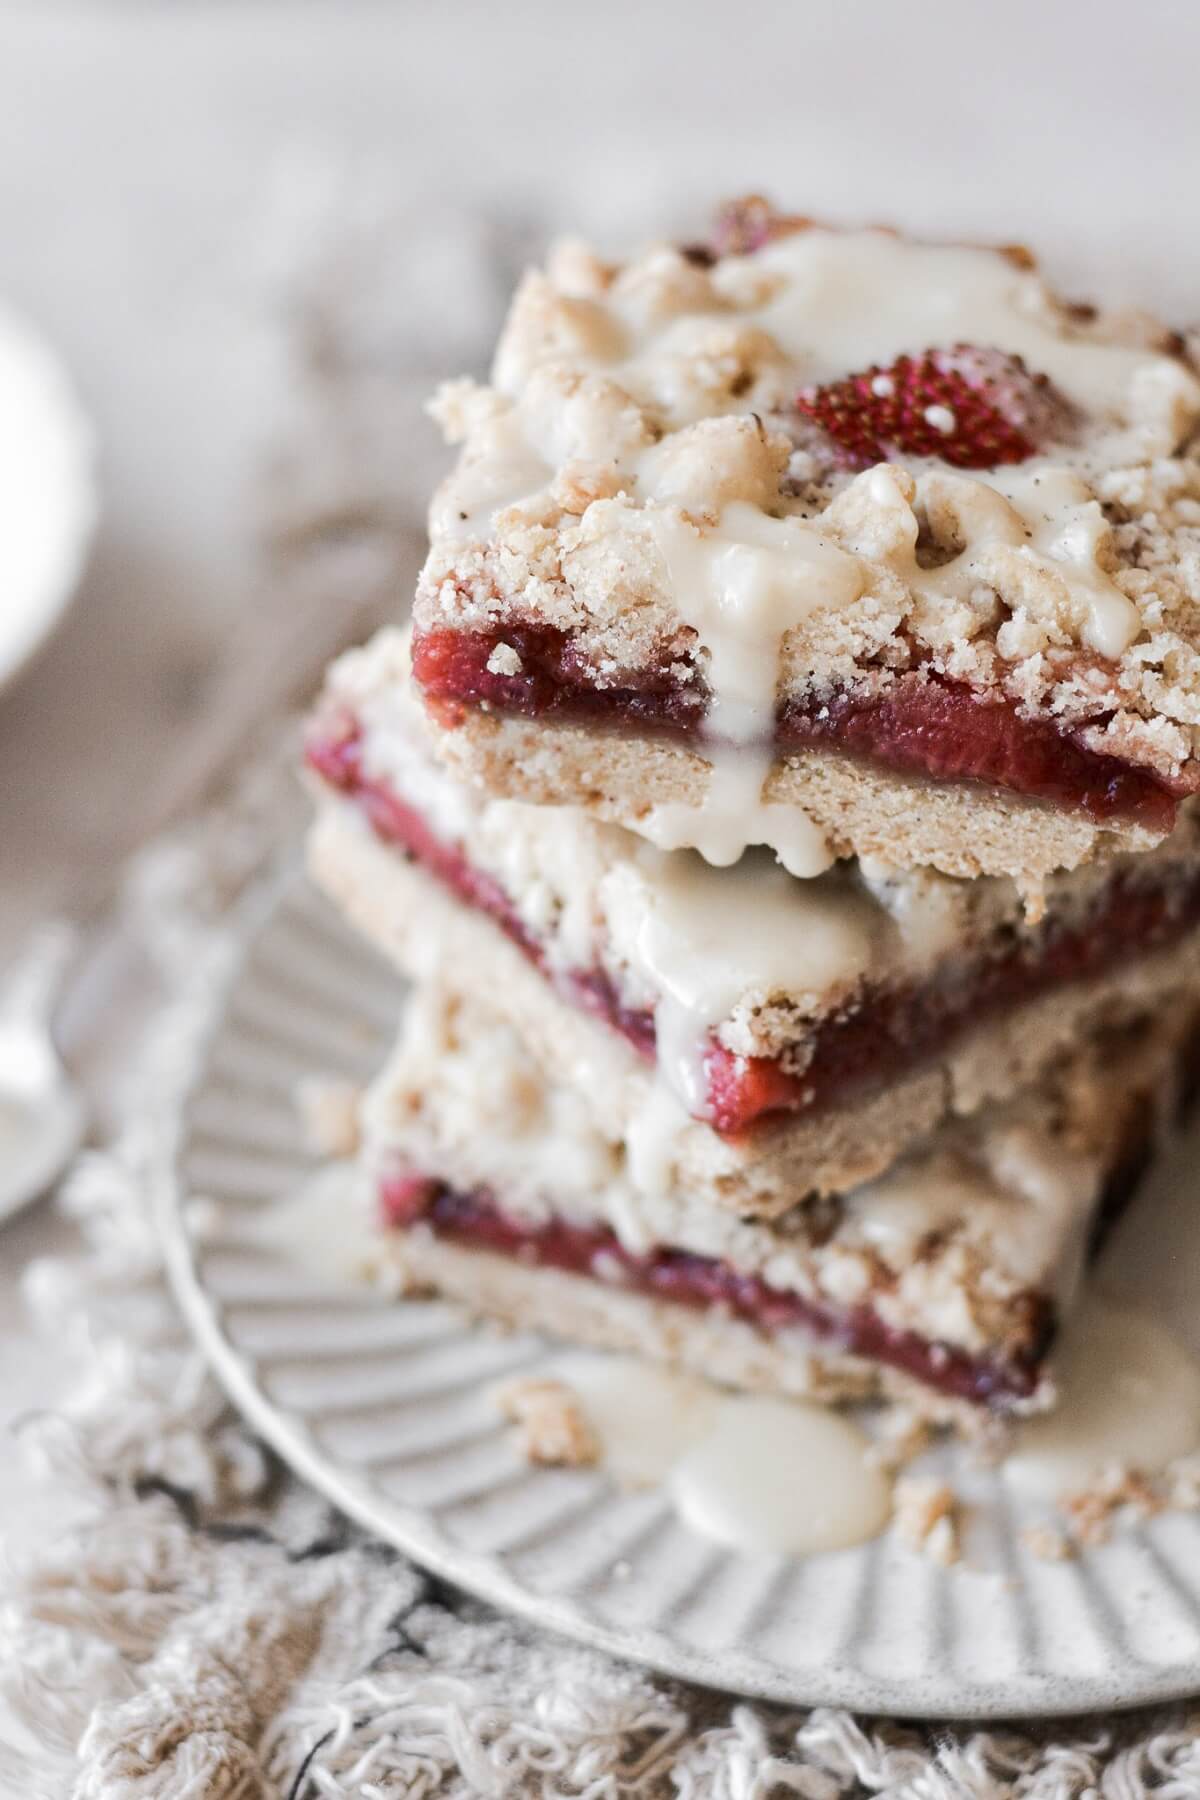 Stack of strawberry crumble bars on a plate.